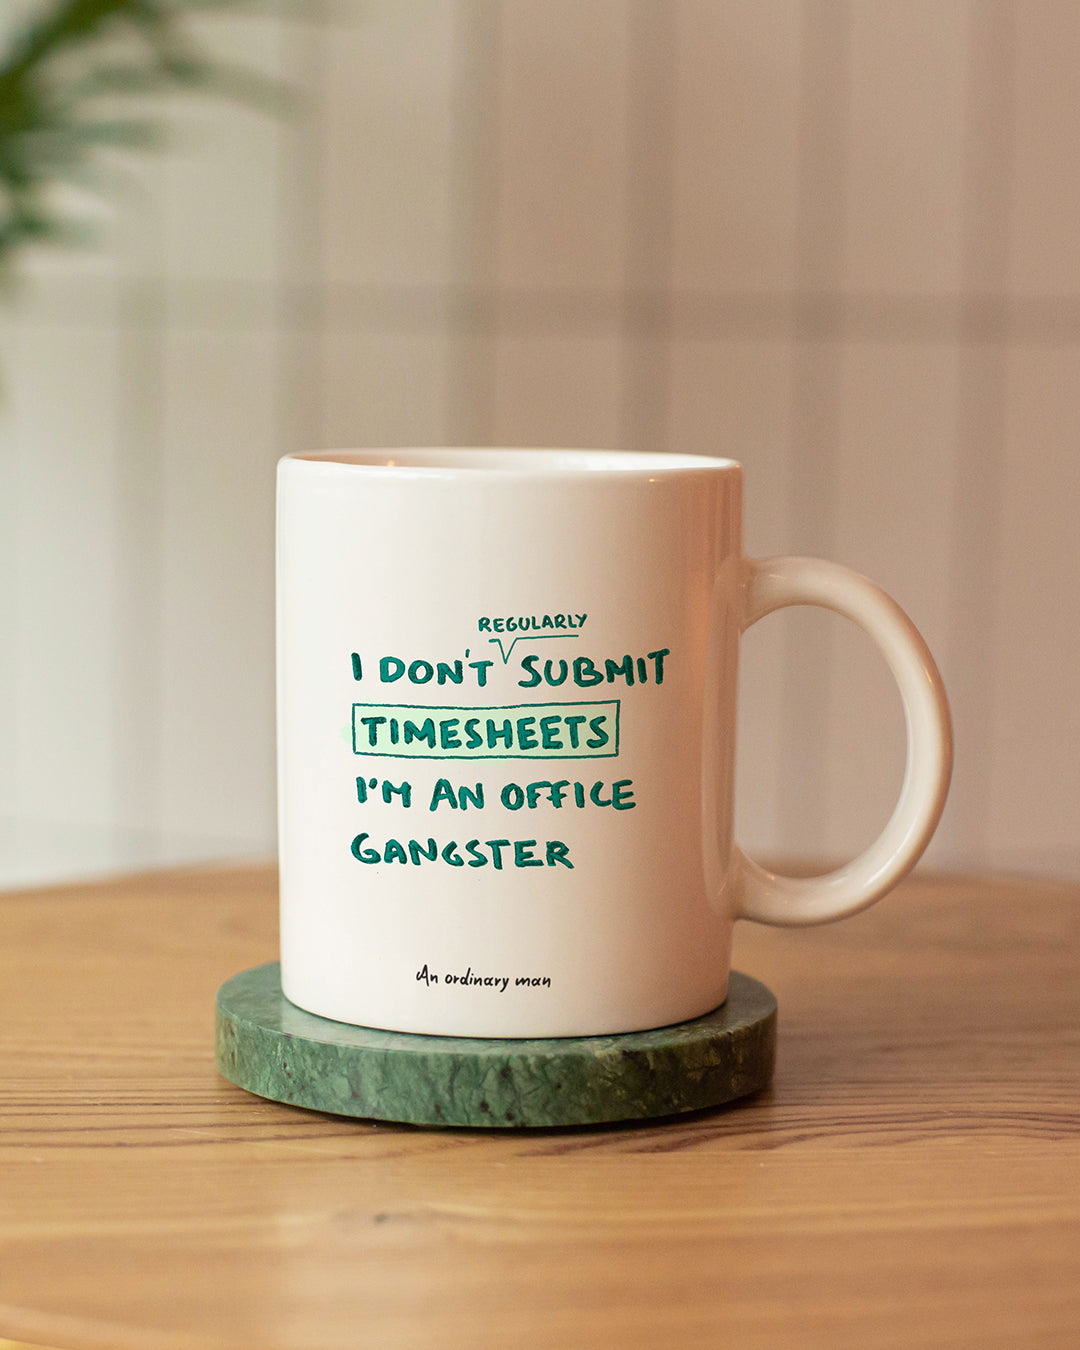 White Glossy Mug - I Don't Regularly Submit Timesheets, I'm An Office Gangster.